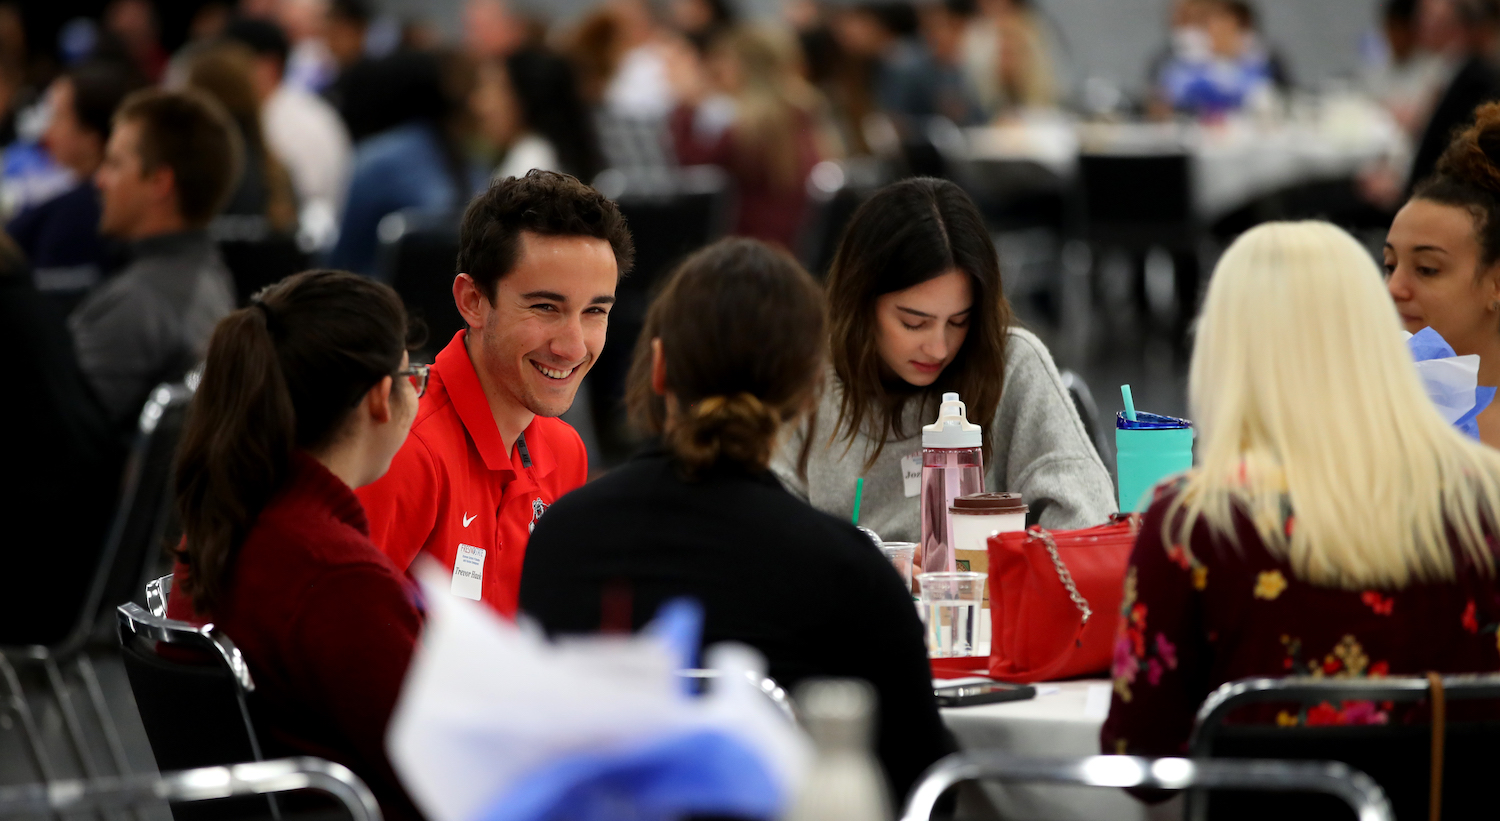 Guy smiling while sitting at table at conference.